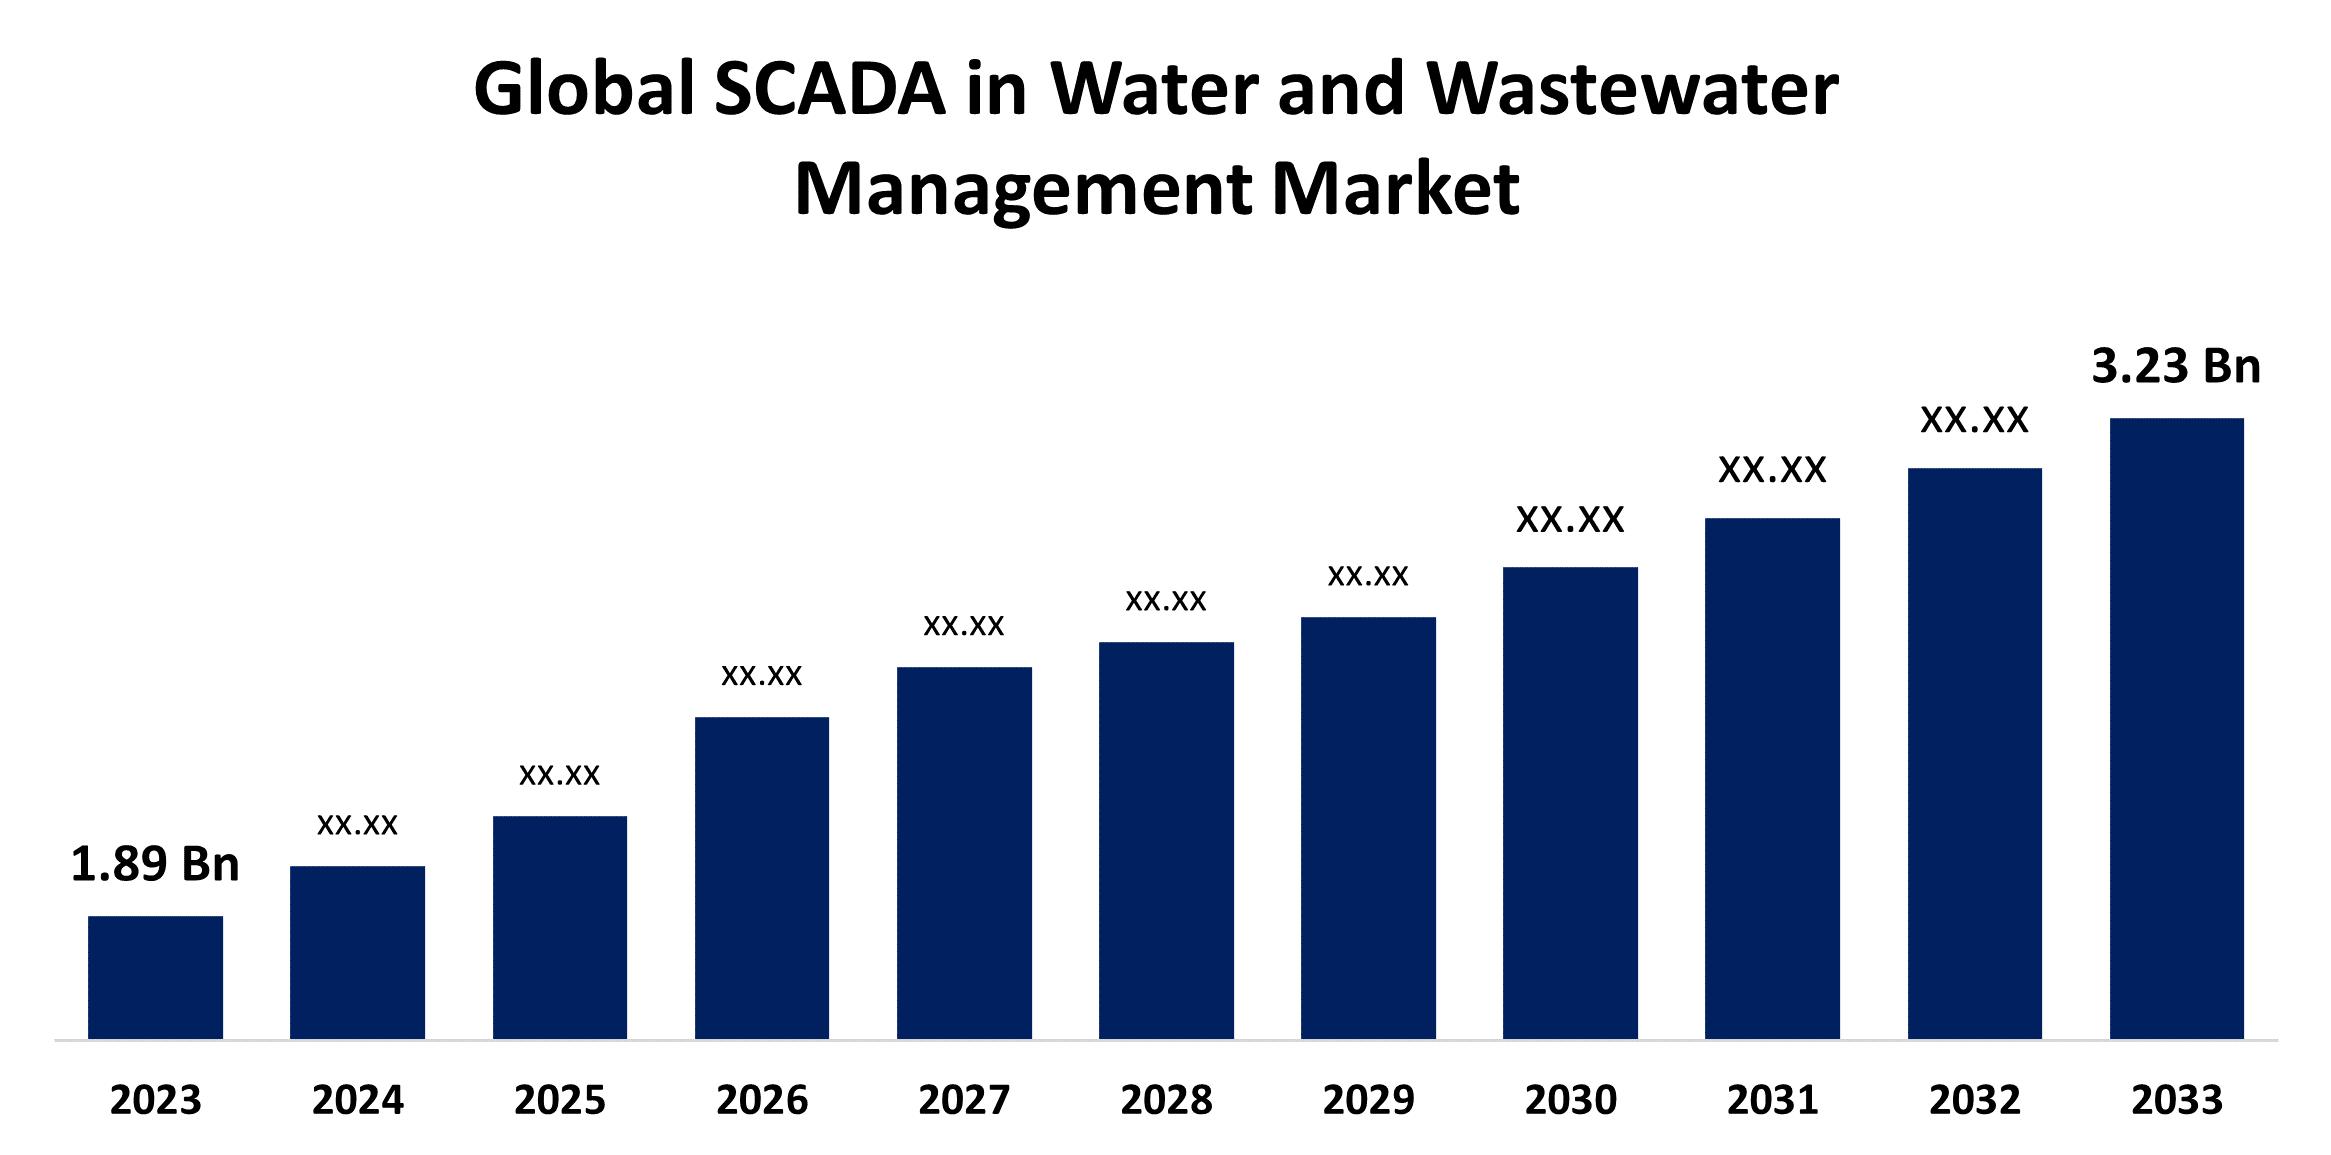 Global SCADA in Water and Wastewater Management Market